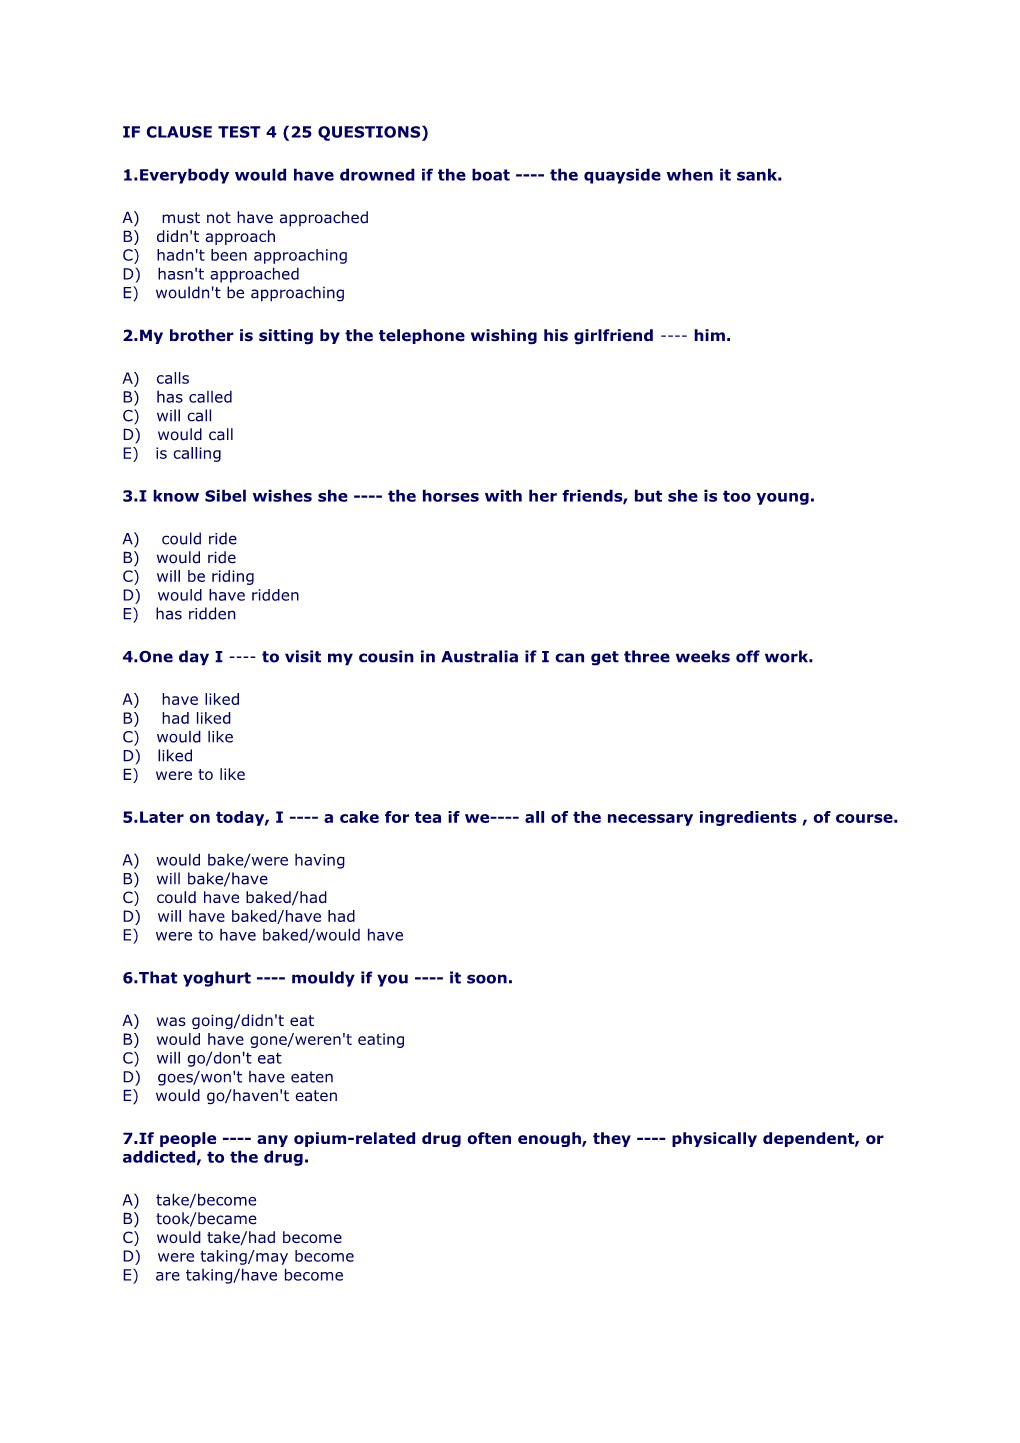 If Clause Test 4 (25 Questions)